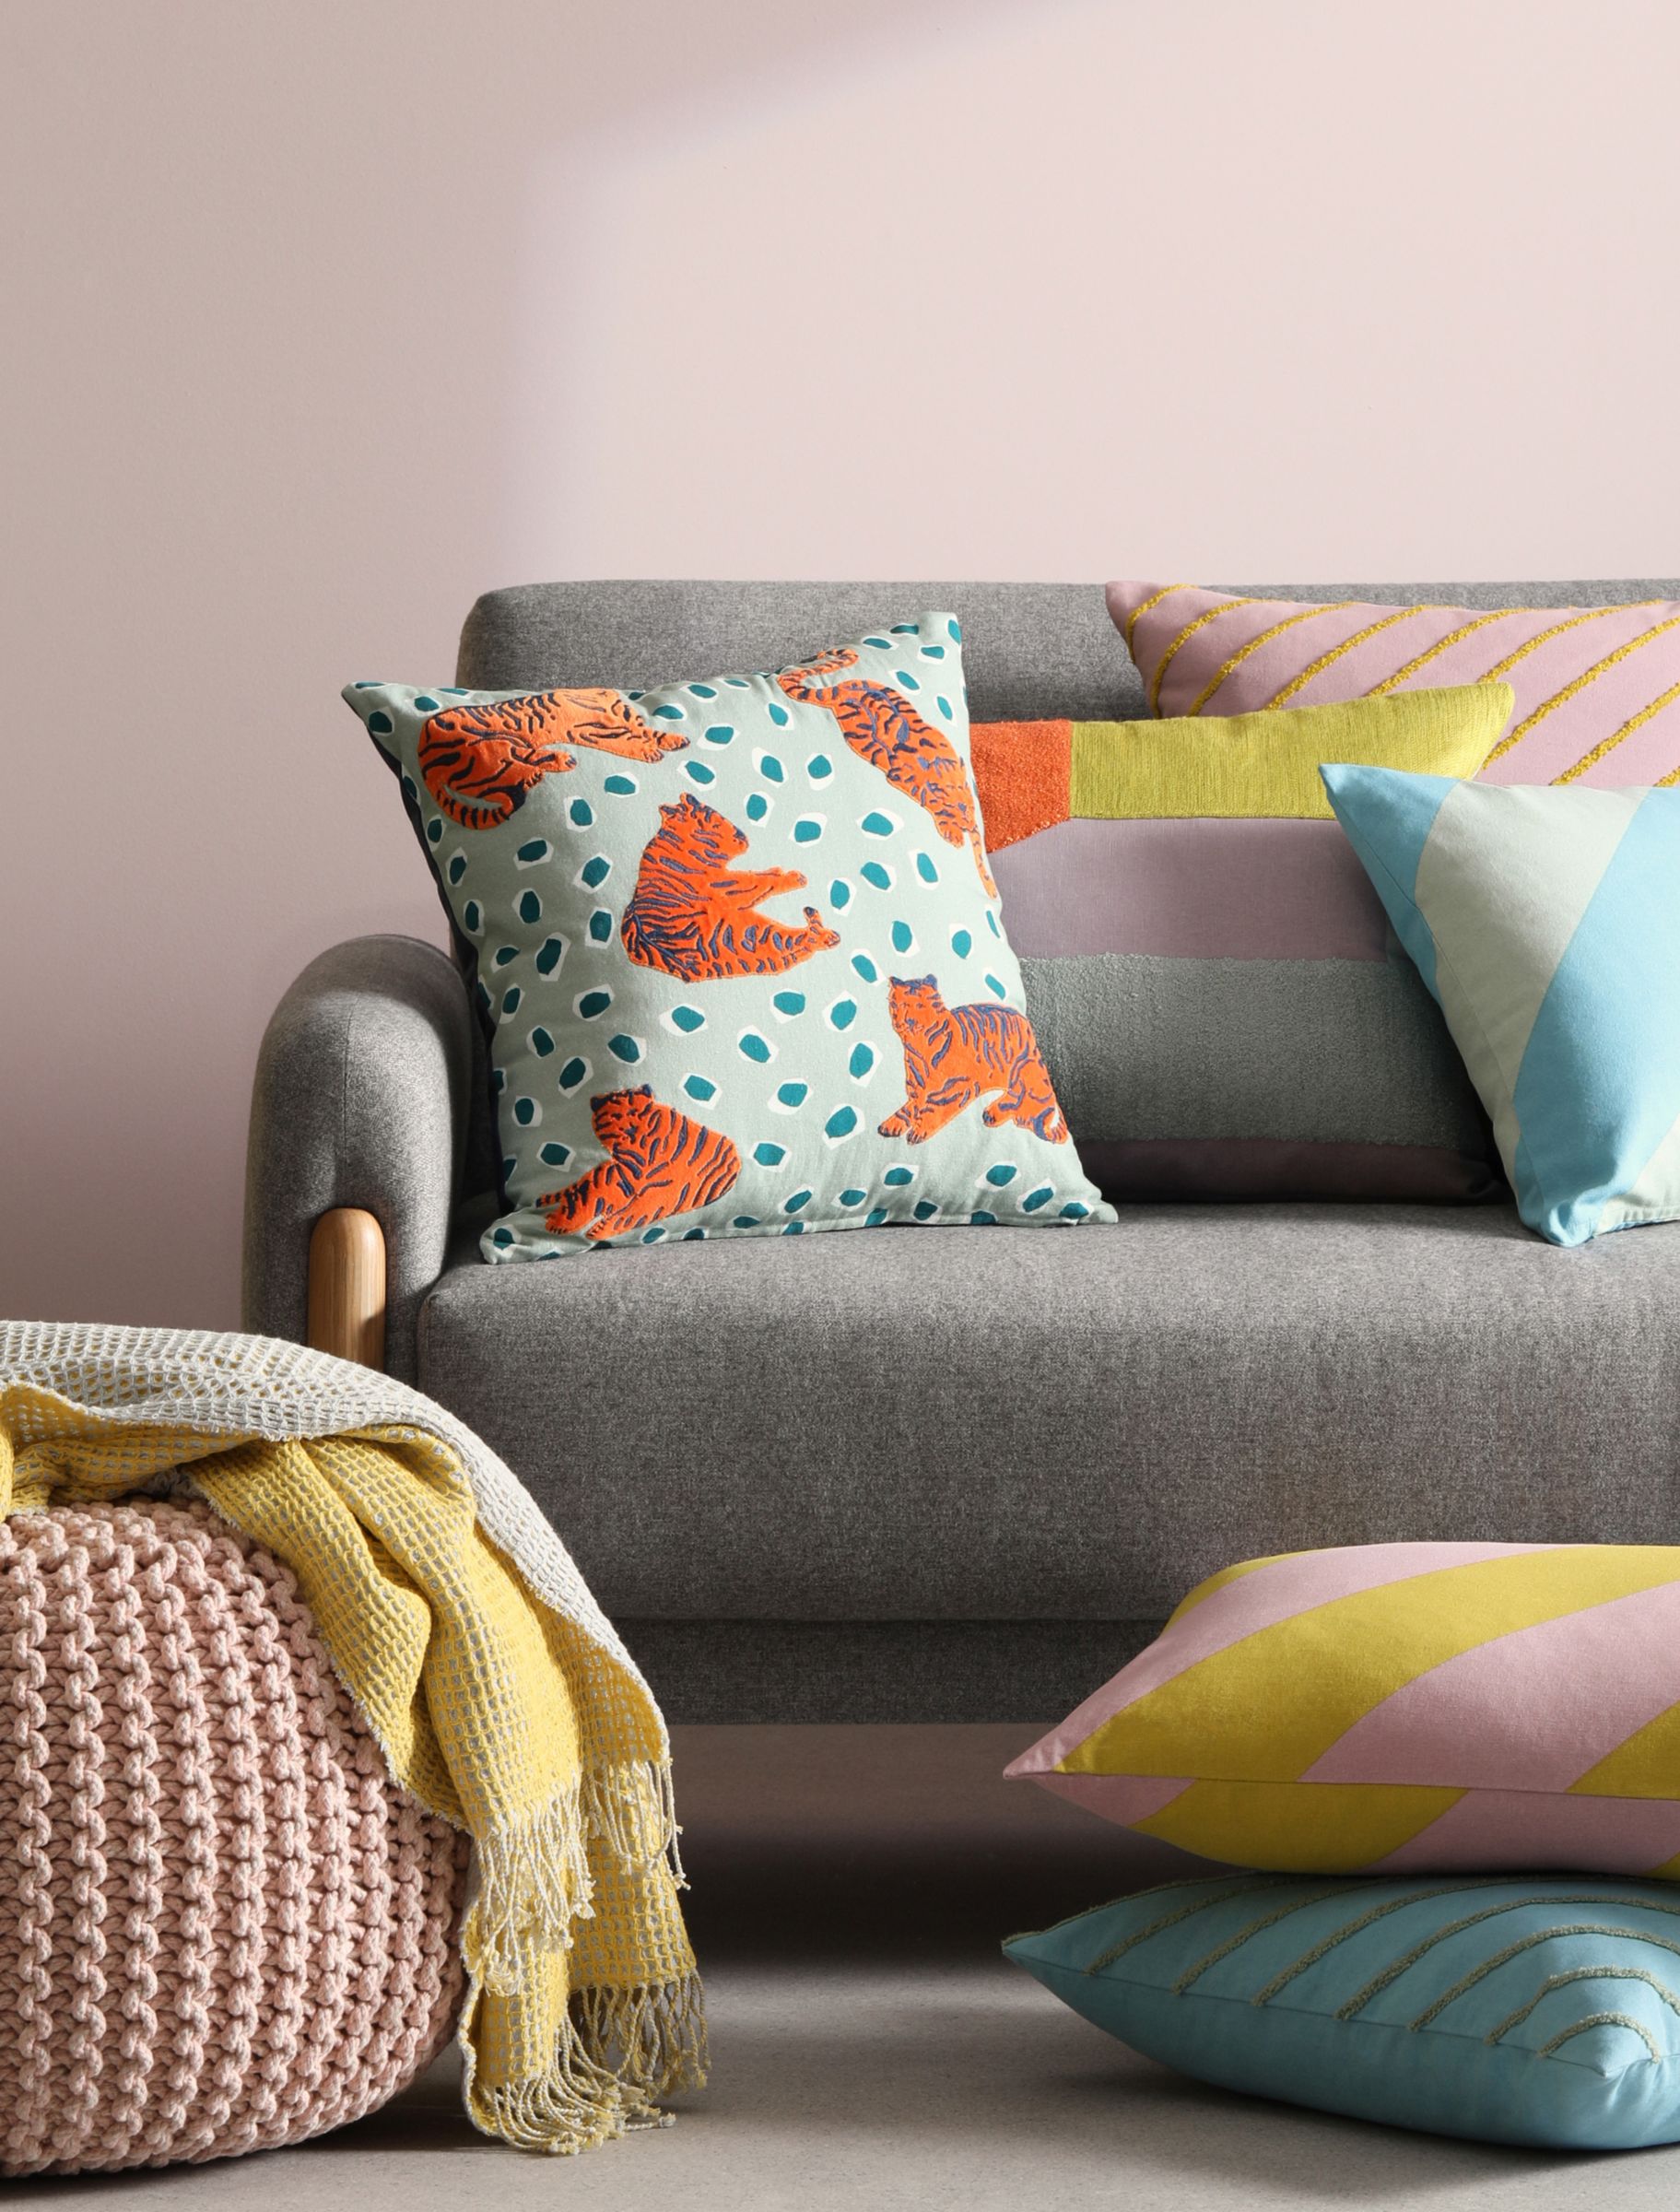 How To Dress A Sofa John Lewis Partners, How To Dress A Corner Sofa With Throws And Cushions